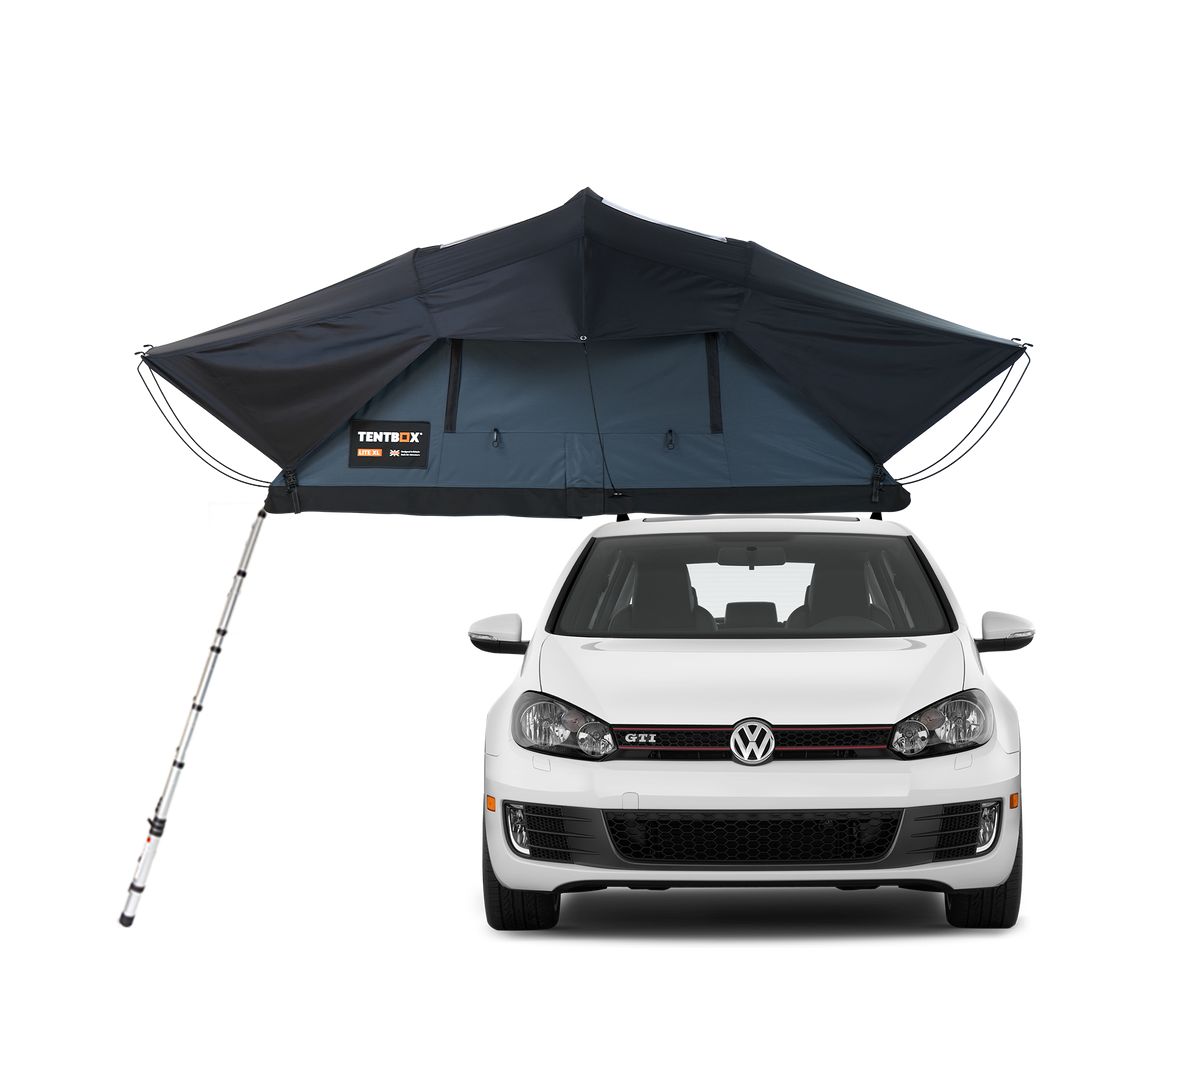 TentBox Lite XL Rooftop Tent - 4 Person